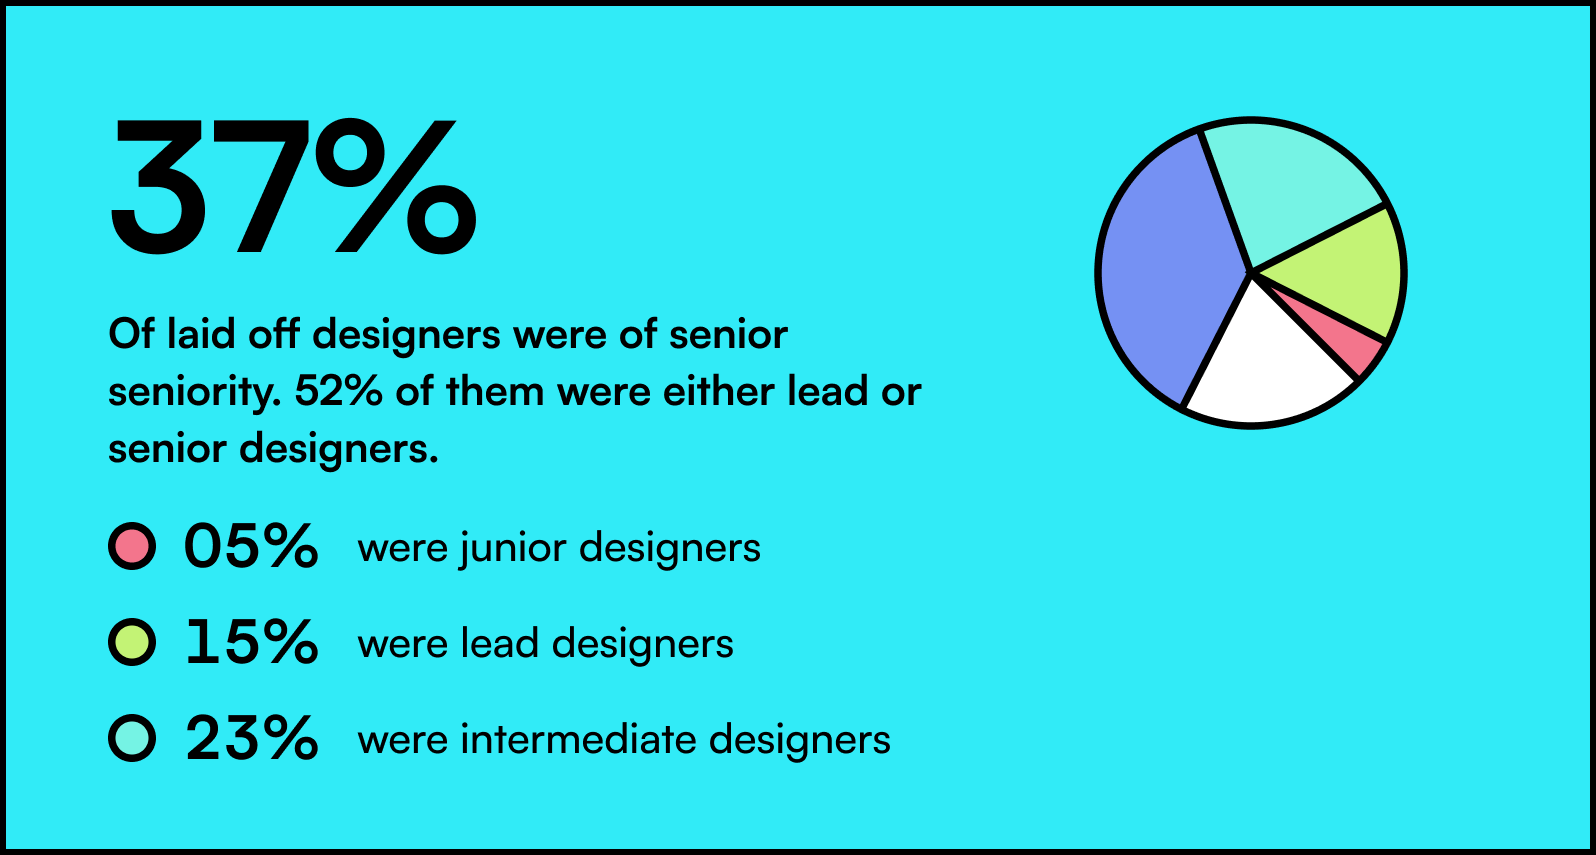 Most laid-off designers were experienced: senior (37%) and lead (15%). 